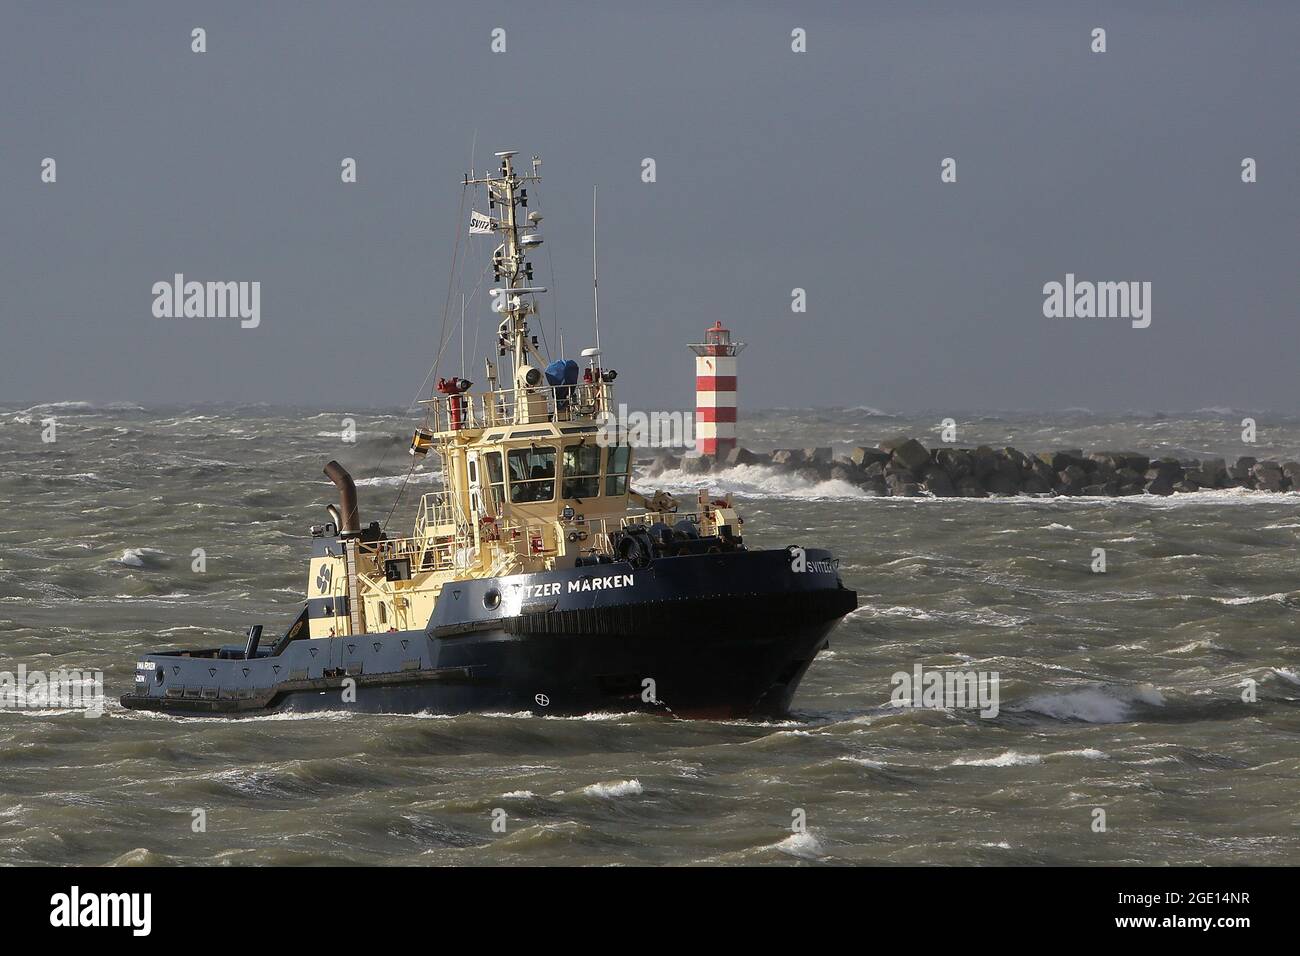 Tugboat Svitzer Marken in the Outer Harbour of IJmuiden/Netherlands during  stormy weather (28-10-2013 Stock Photo - Alamy